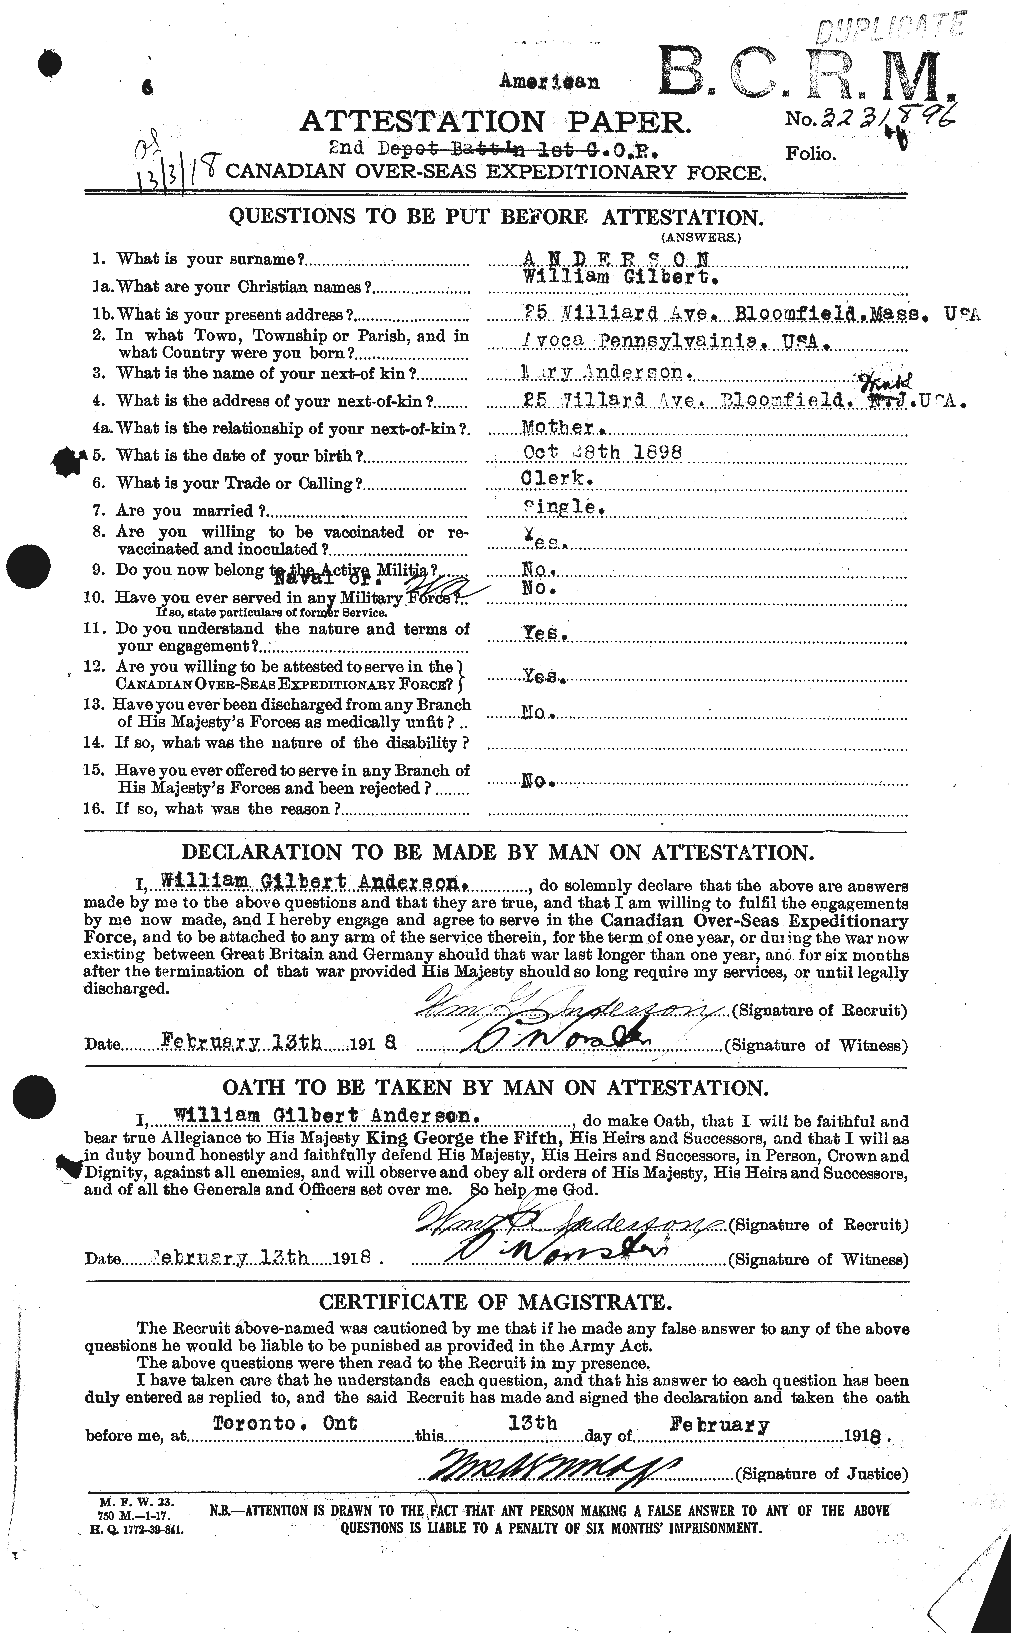 Personnel Records of the First World War - CEF 210721a